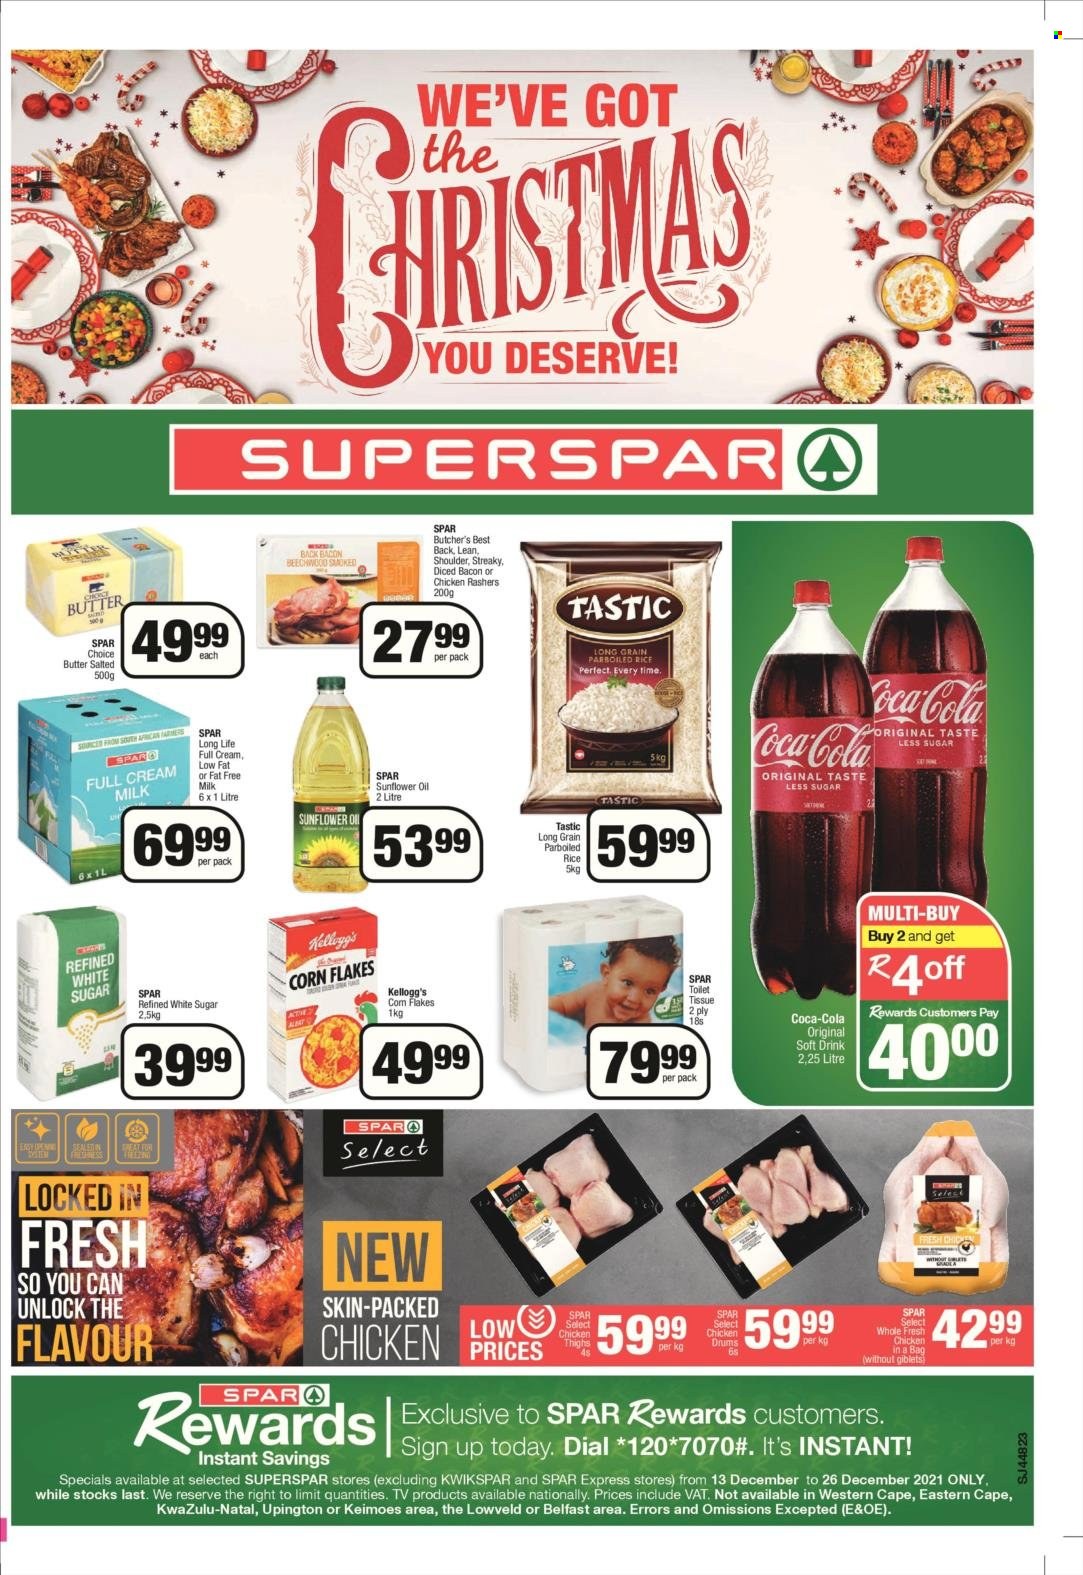 SPAR catalogue  - 13/12/2021 - 26/12/2021 - Sales products - bacon, rashers, butter, Kellogg's, corn flakes, rice, Tastic, sunflower oil, oil, Coca-Cola, soft drink, toilet paper, Dial. Page 1.